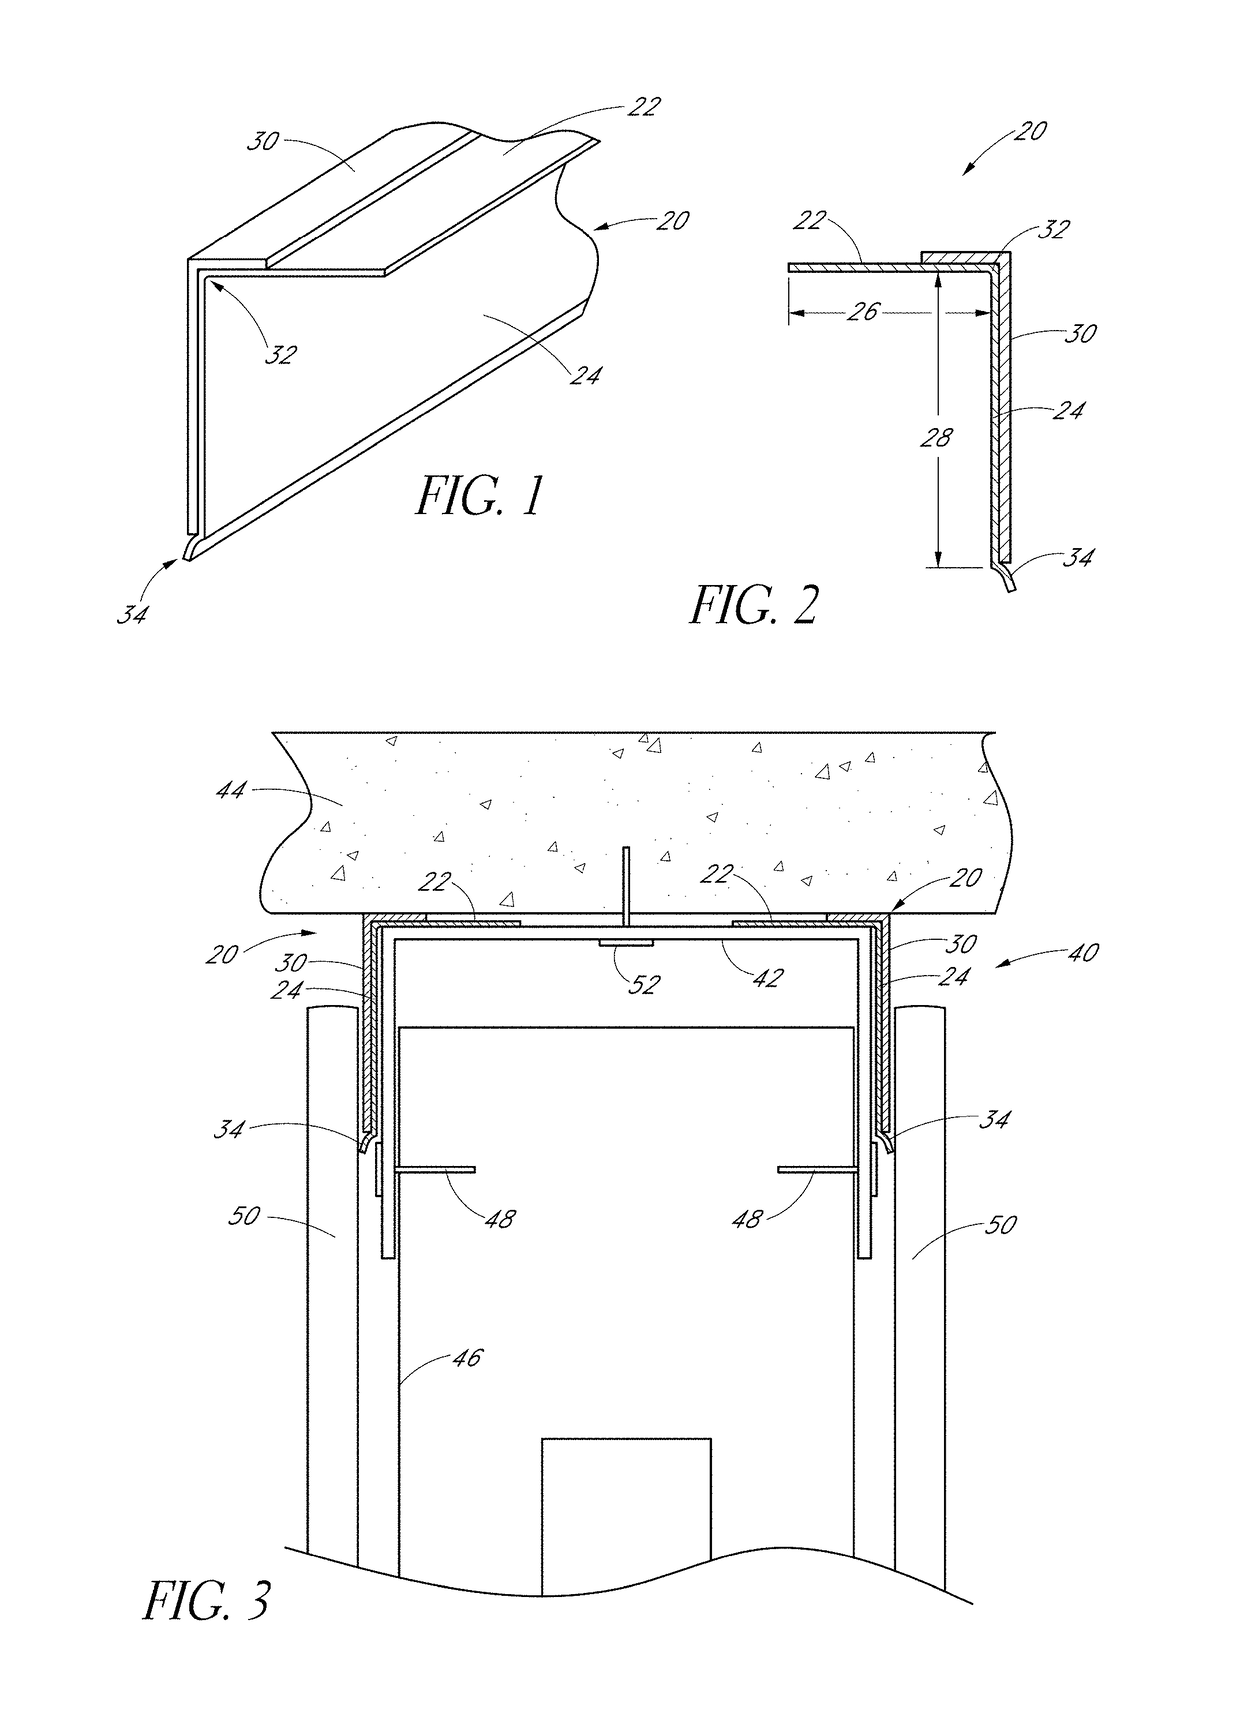 Fire-rated joint system